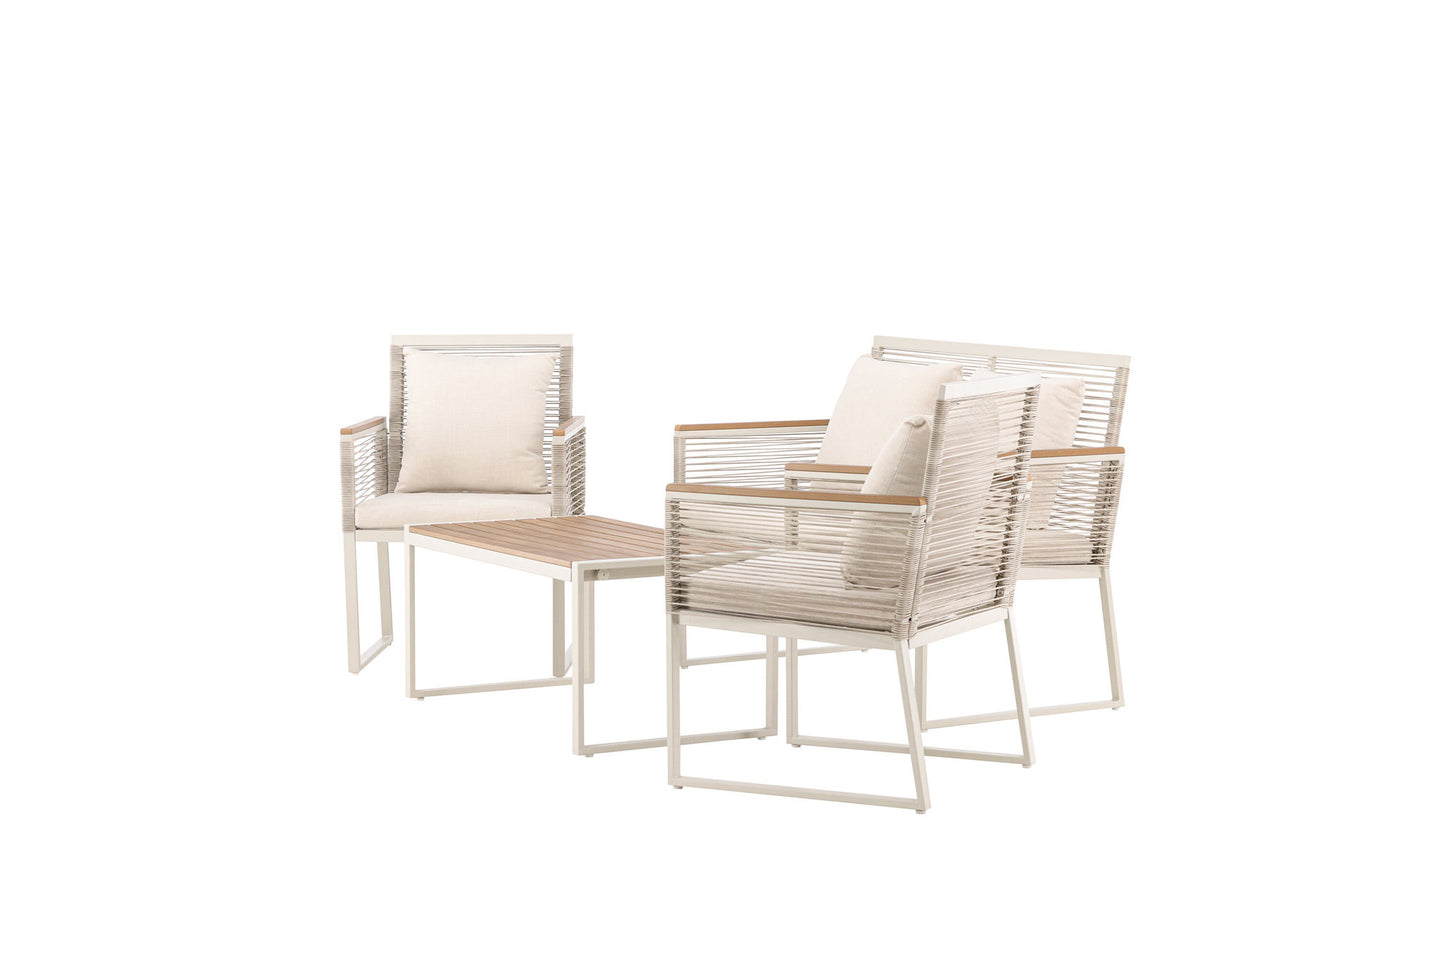 Dallas Lounge Set - Beige / lysegrå polyester